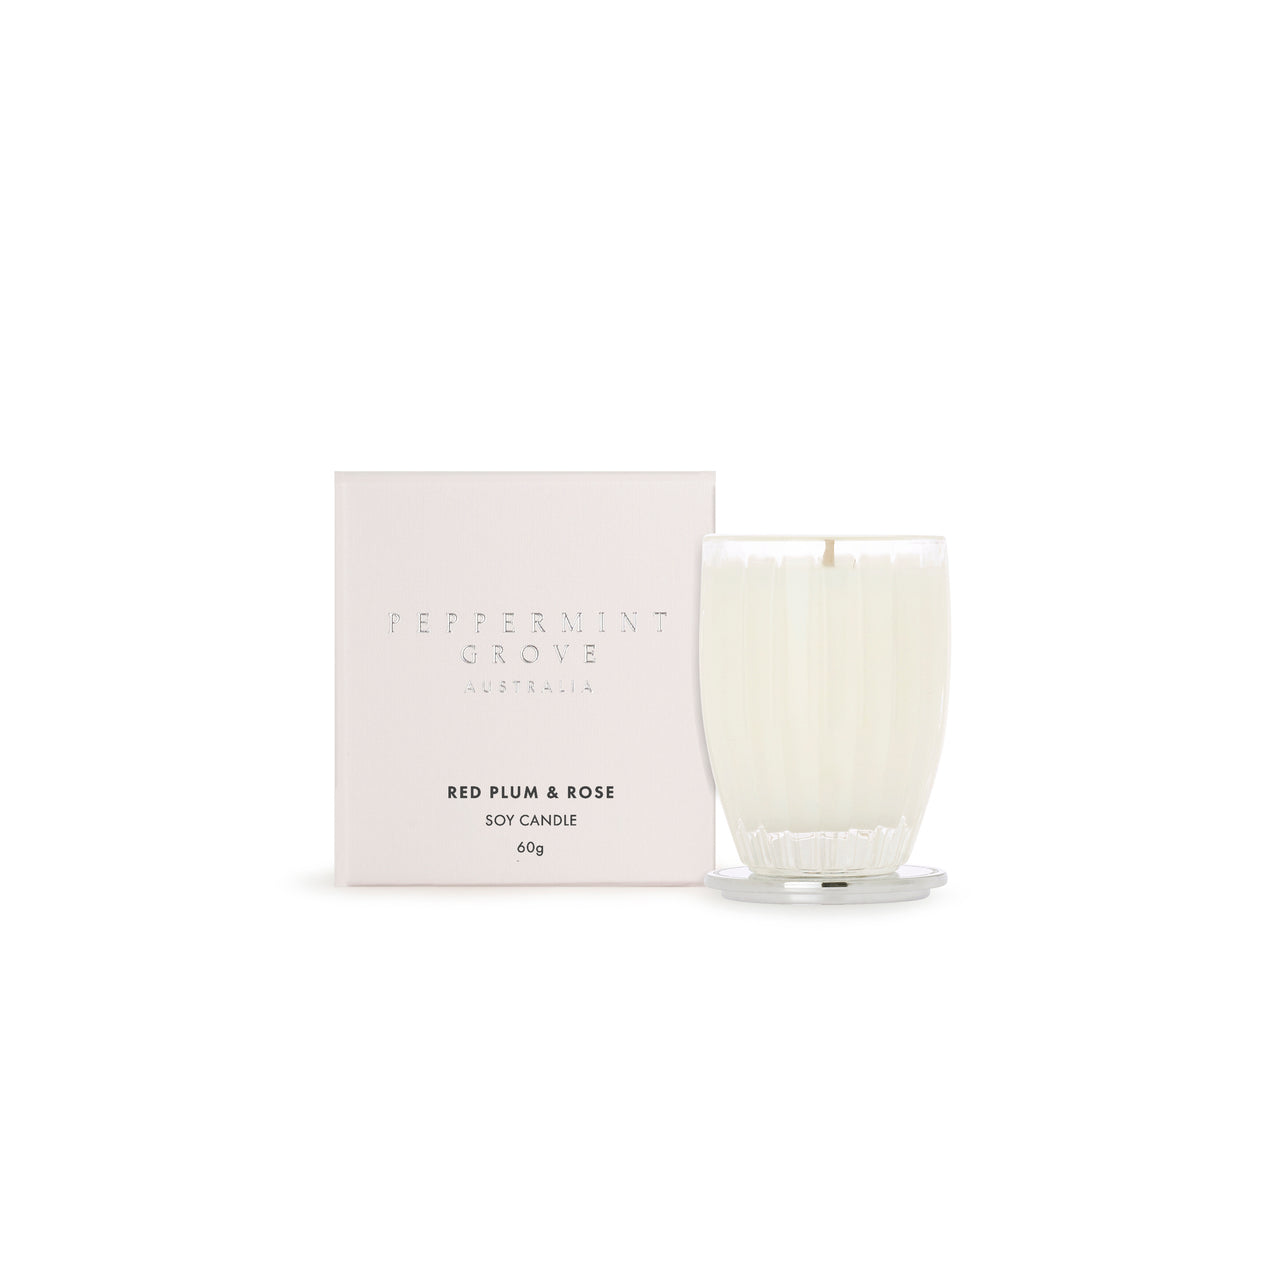 Red Plum & Rose Soy Candle